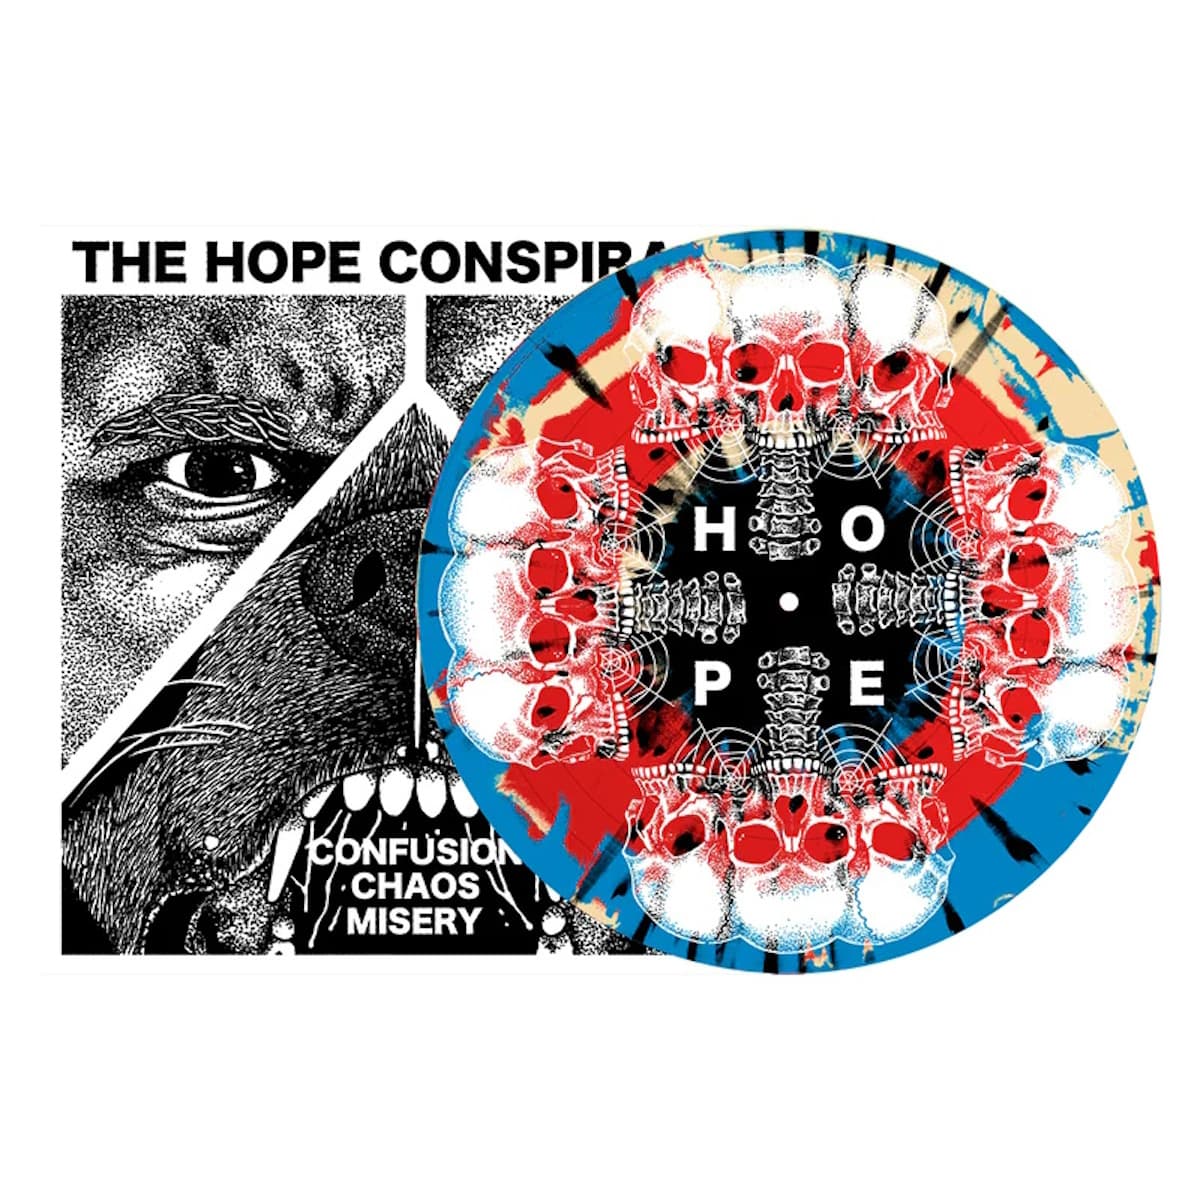 THE HOPE CONSPIRACY